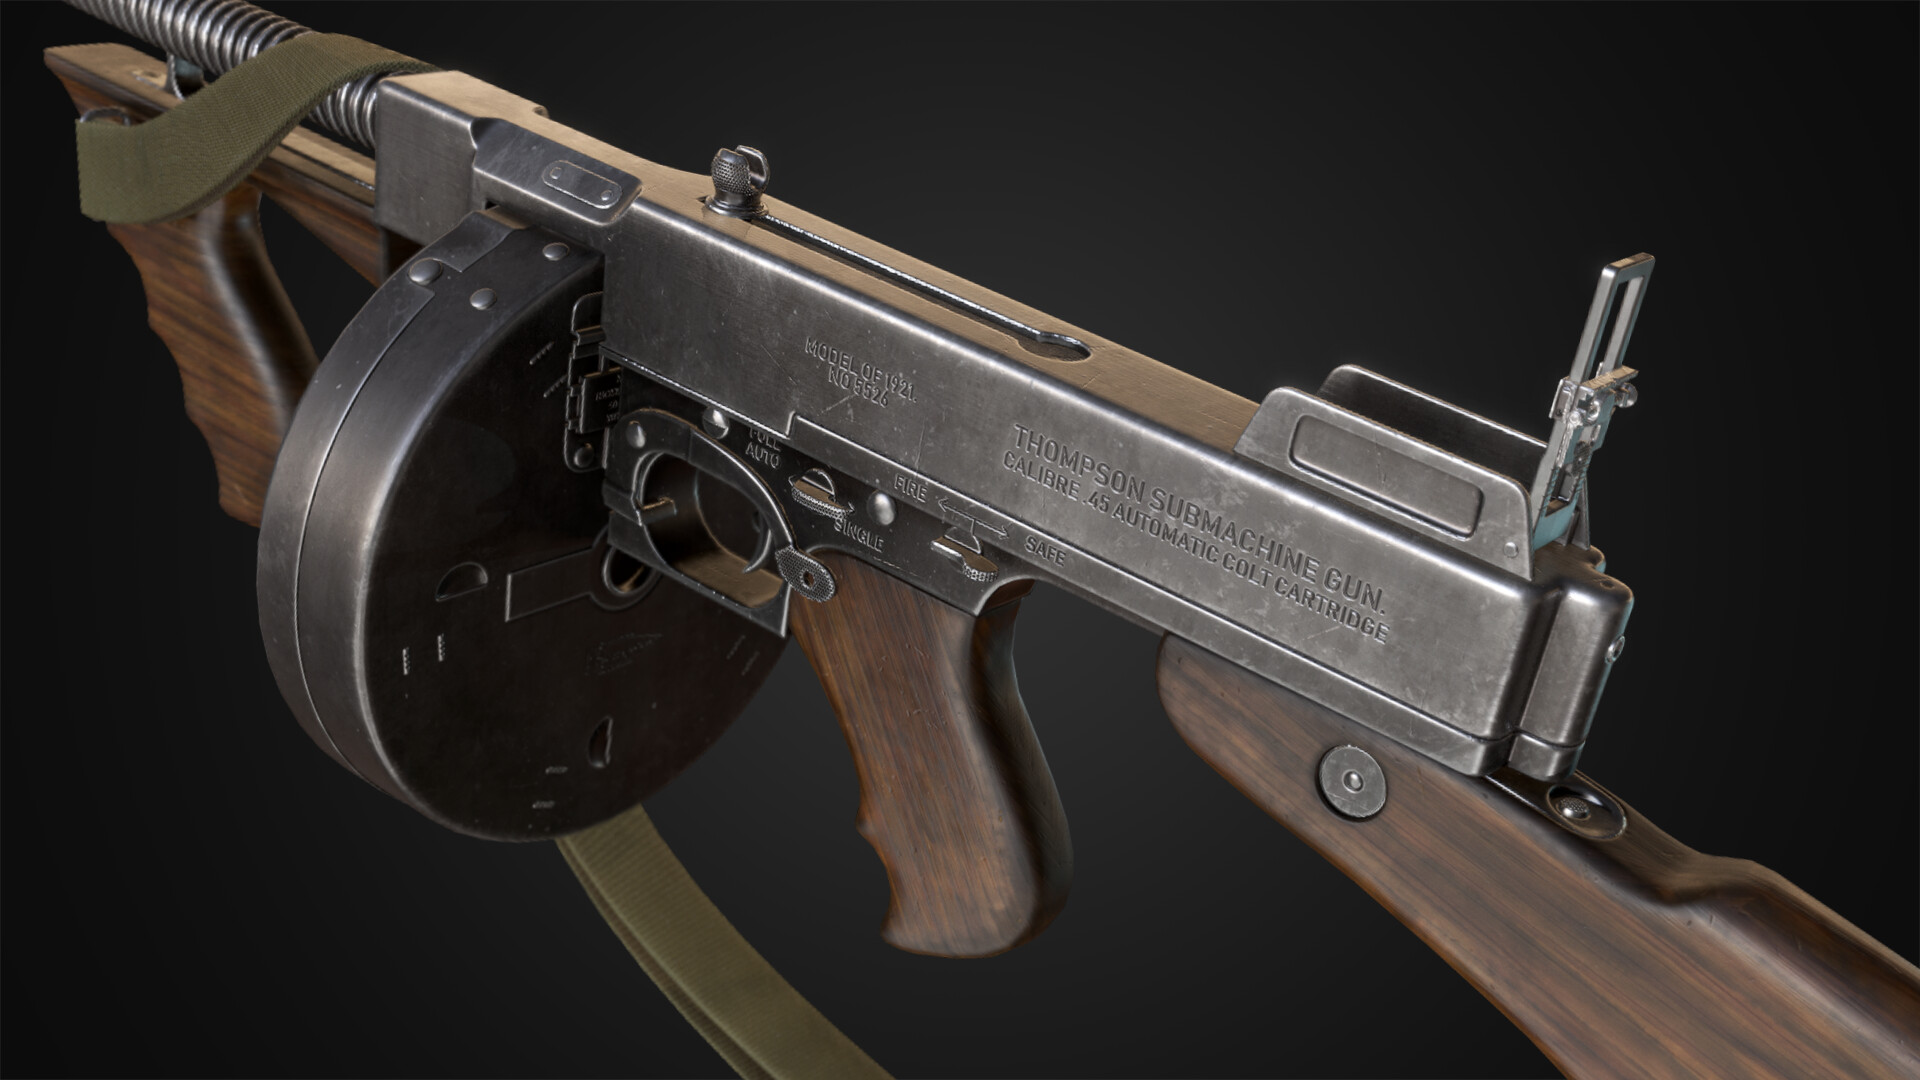 14 Facts About Thompson Submachine Gun - Facts.net